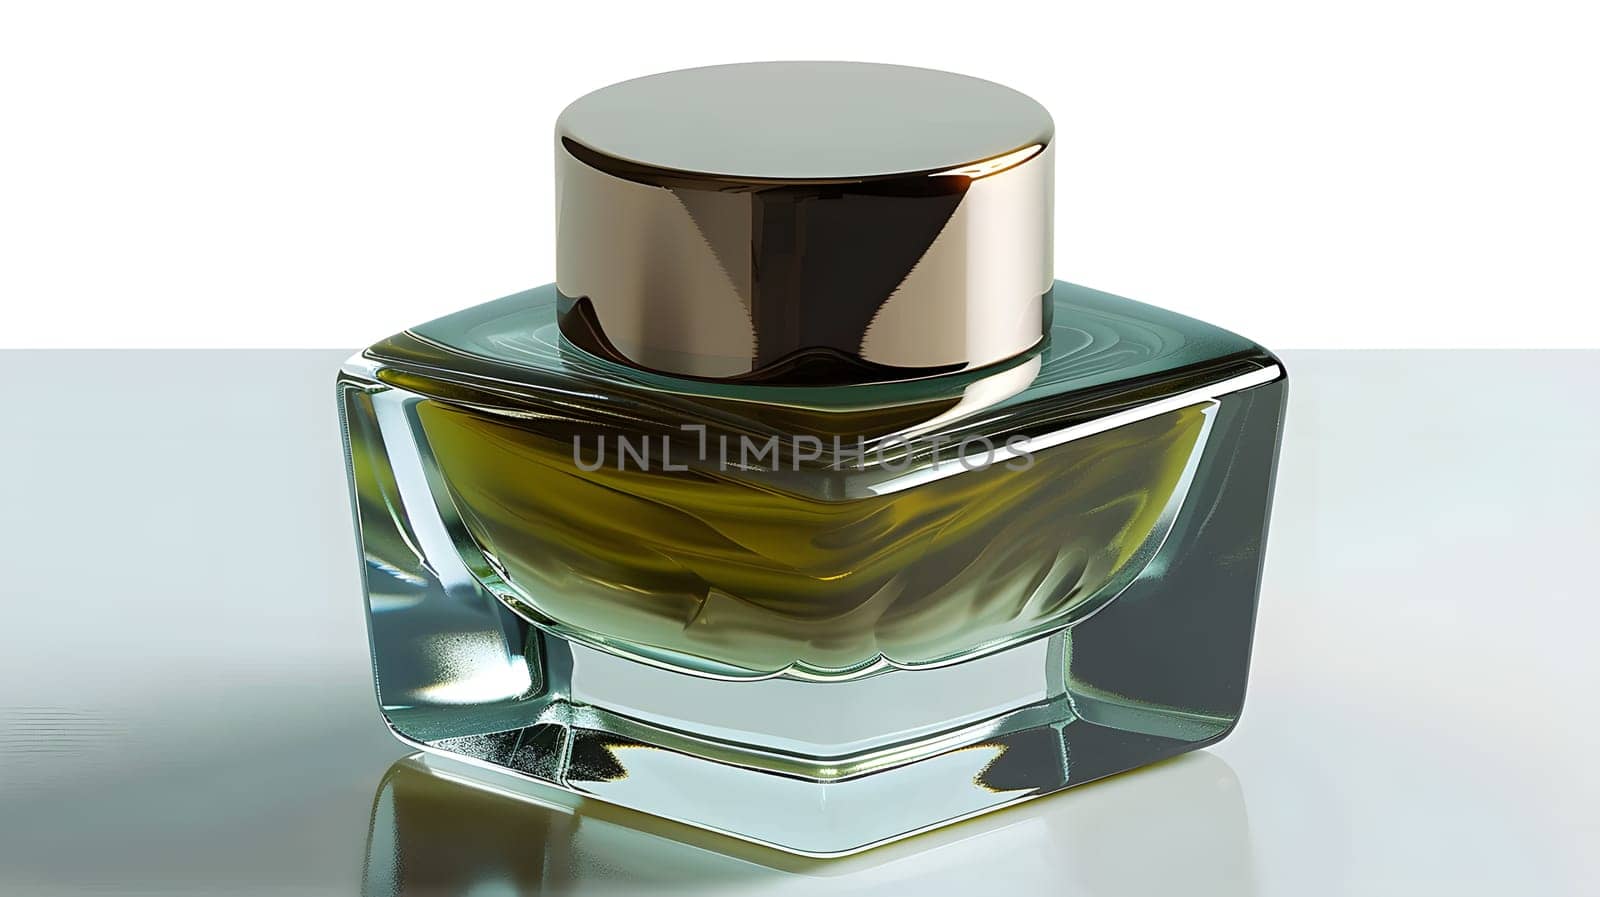 A small bottle of perfume rests on the table, filled with fragrant liquid by Nadtochiy